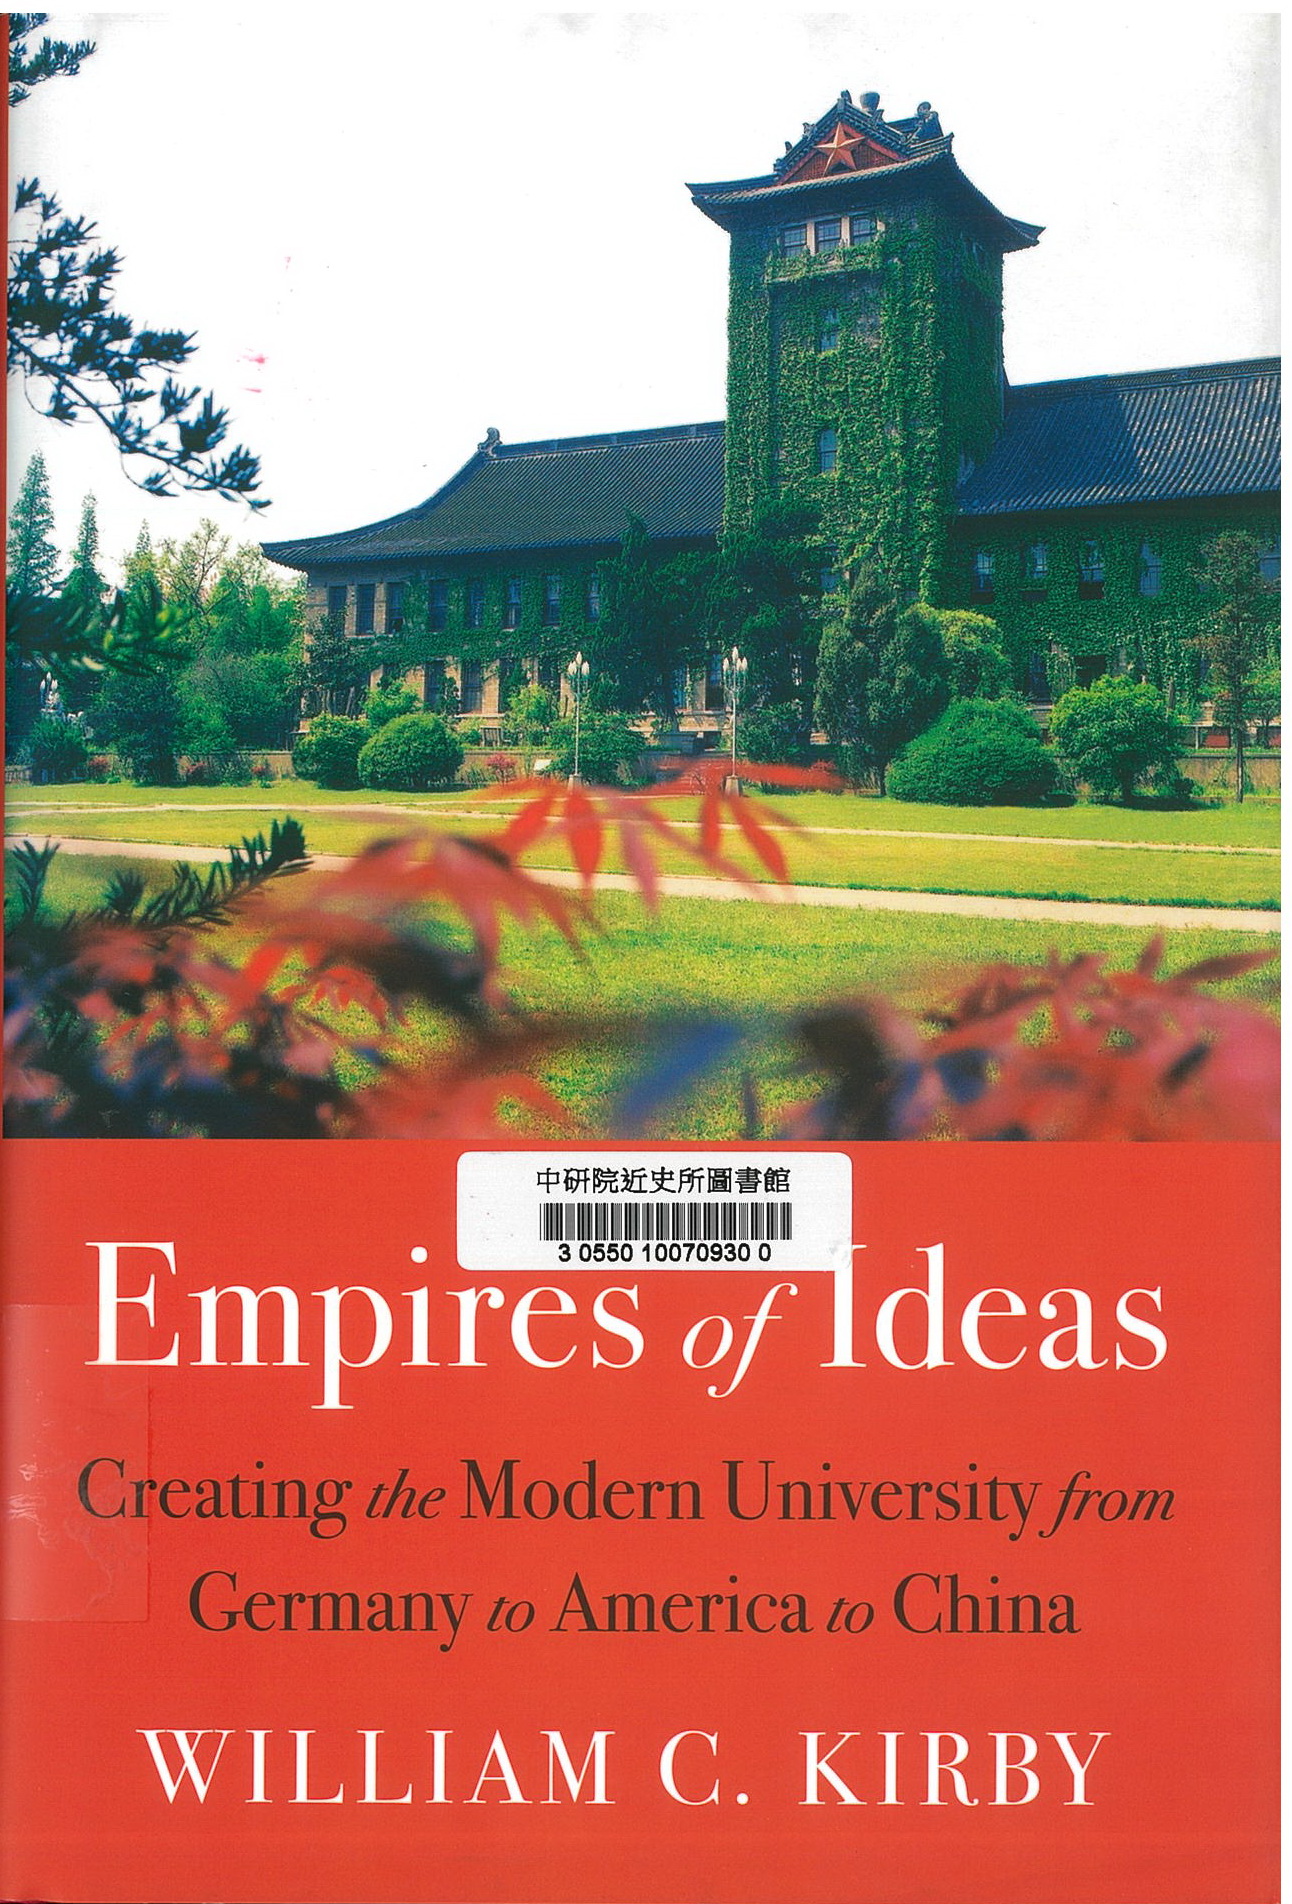 Empires of ideas : creating the modern university from Germany to America to China